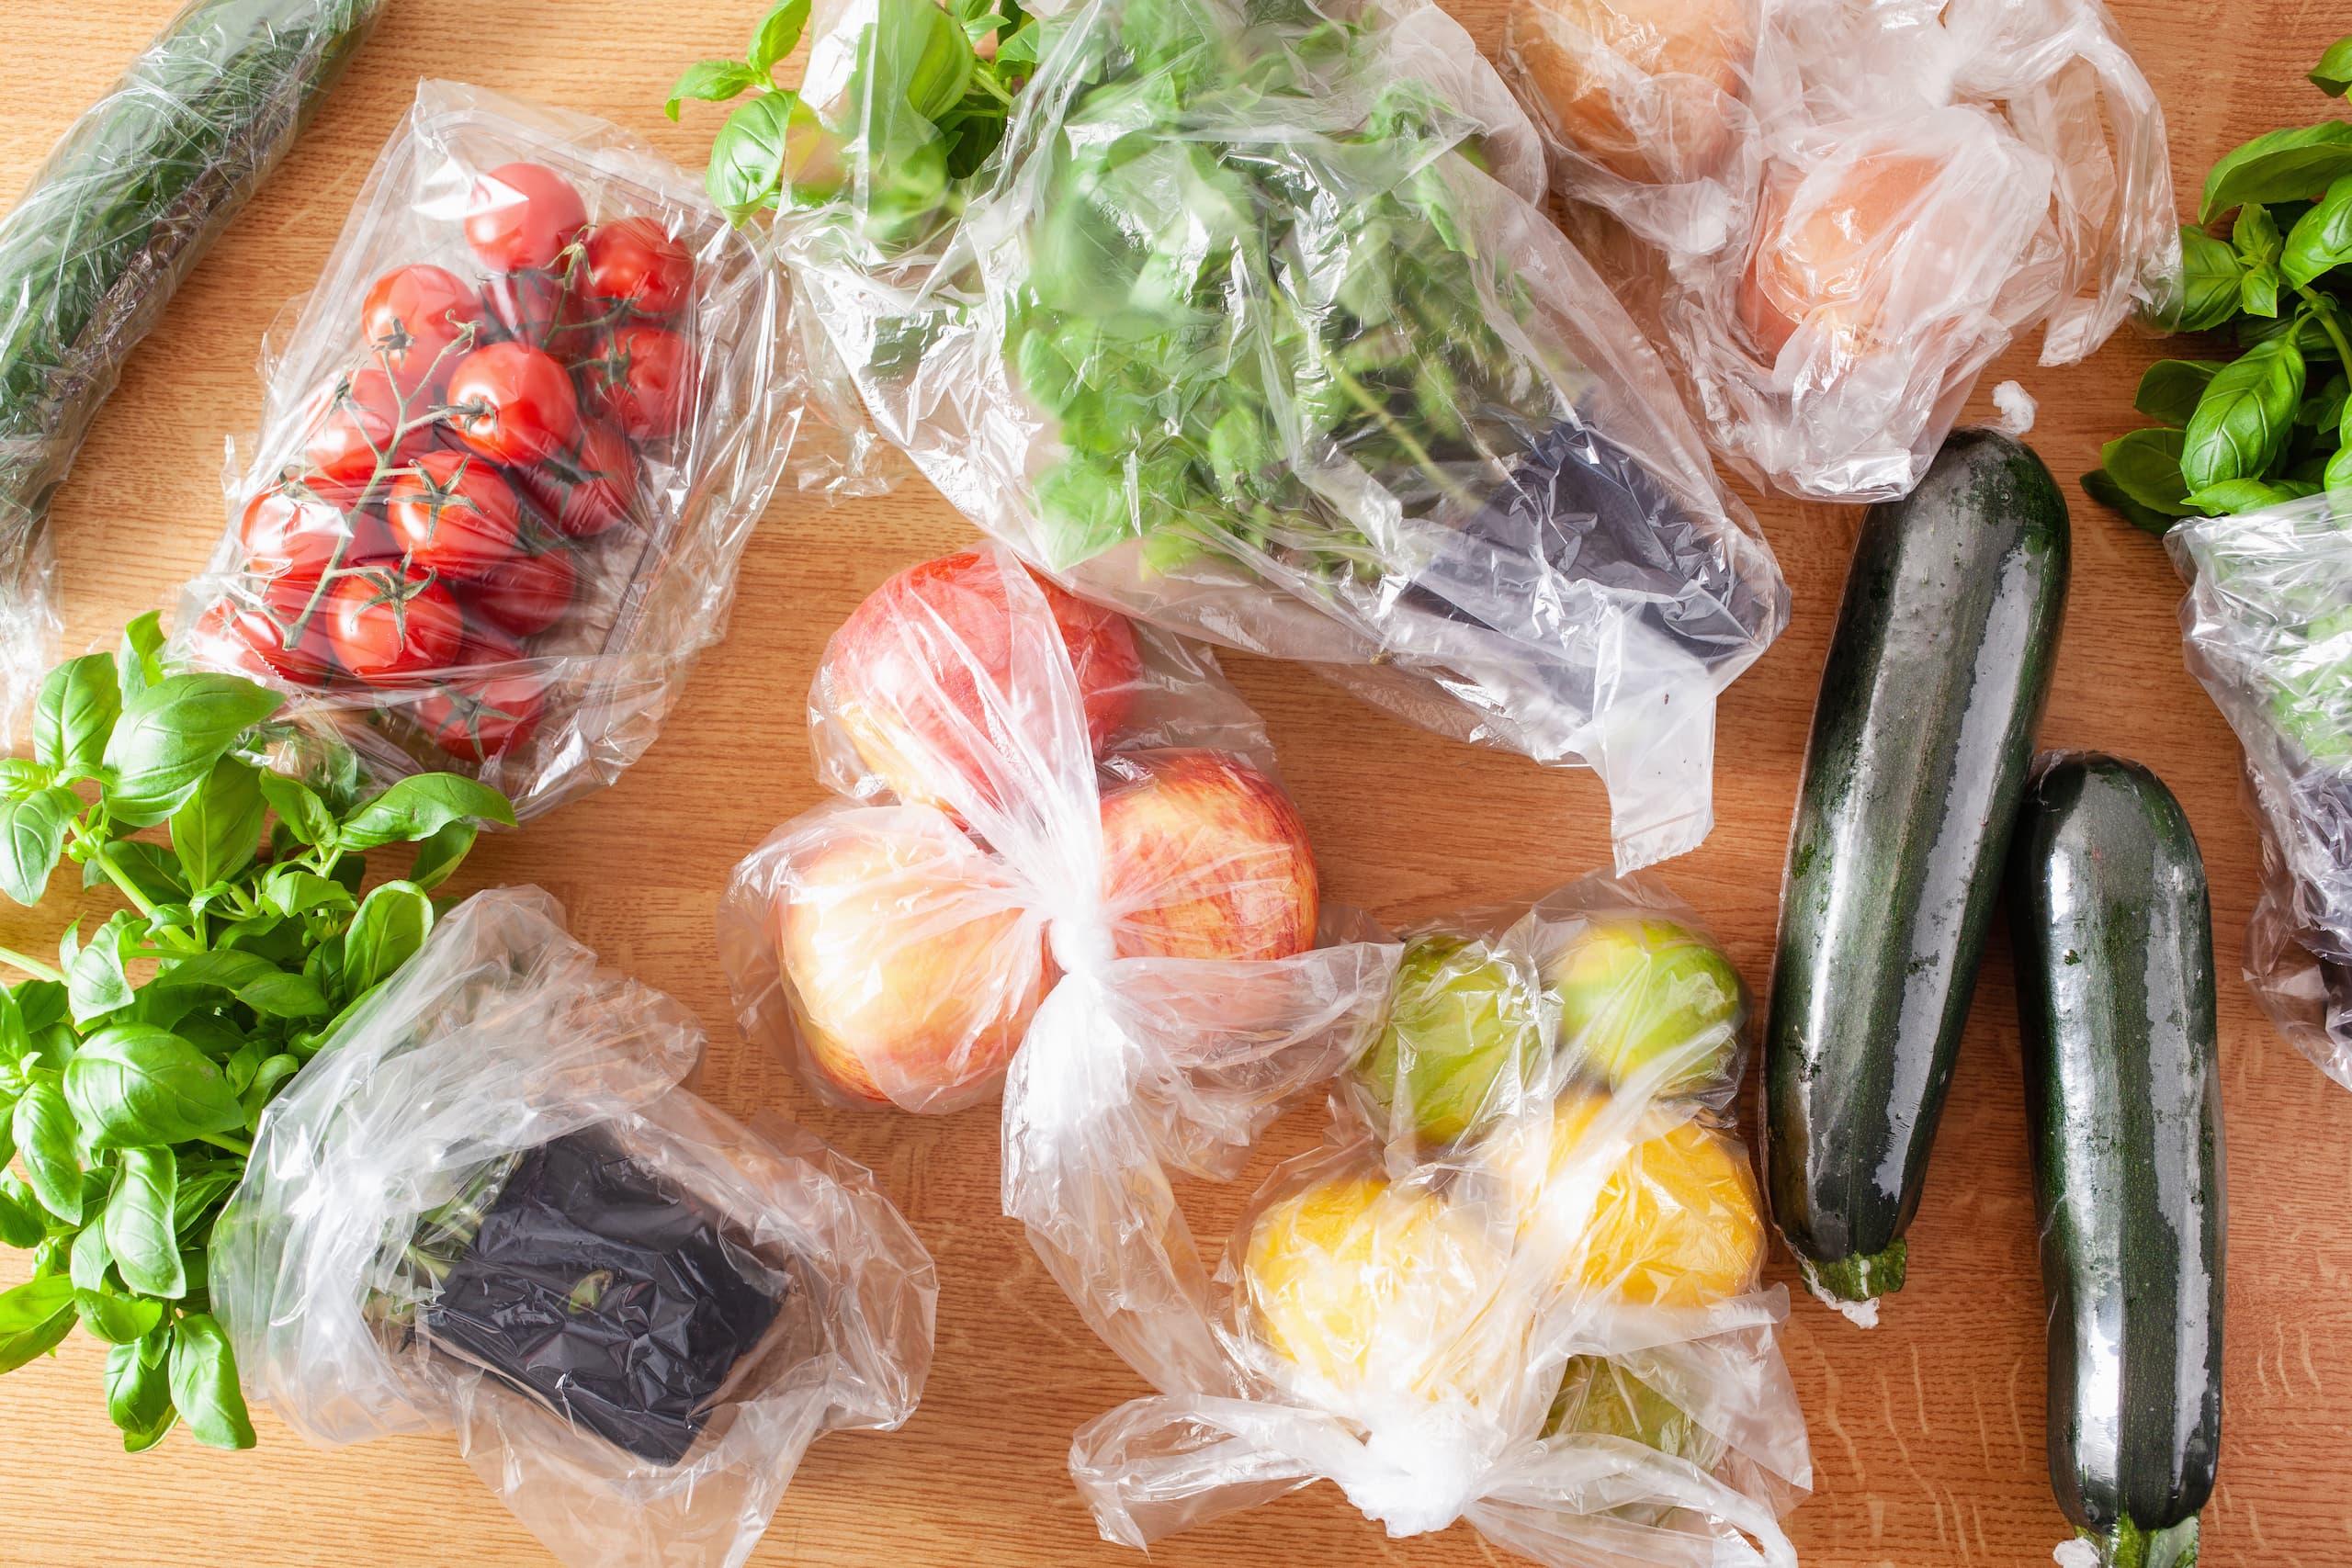 Top-down view of fruits and vegetables in plastic bags on a table